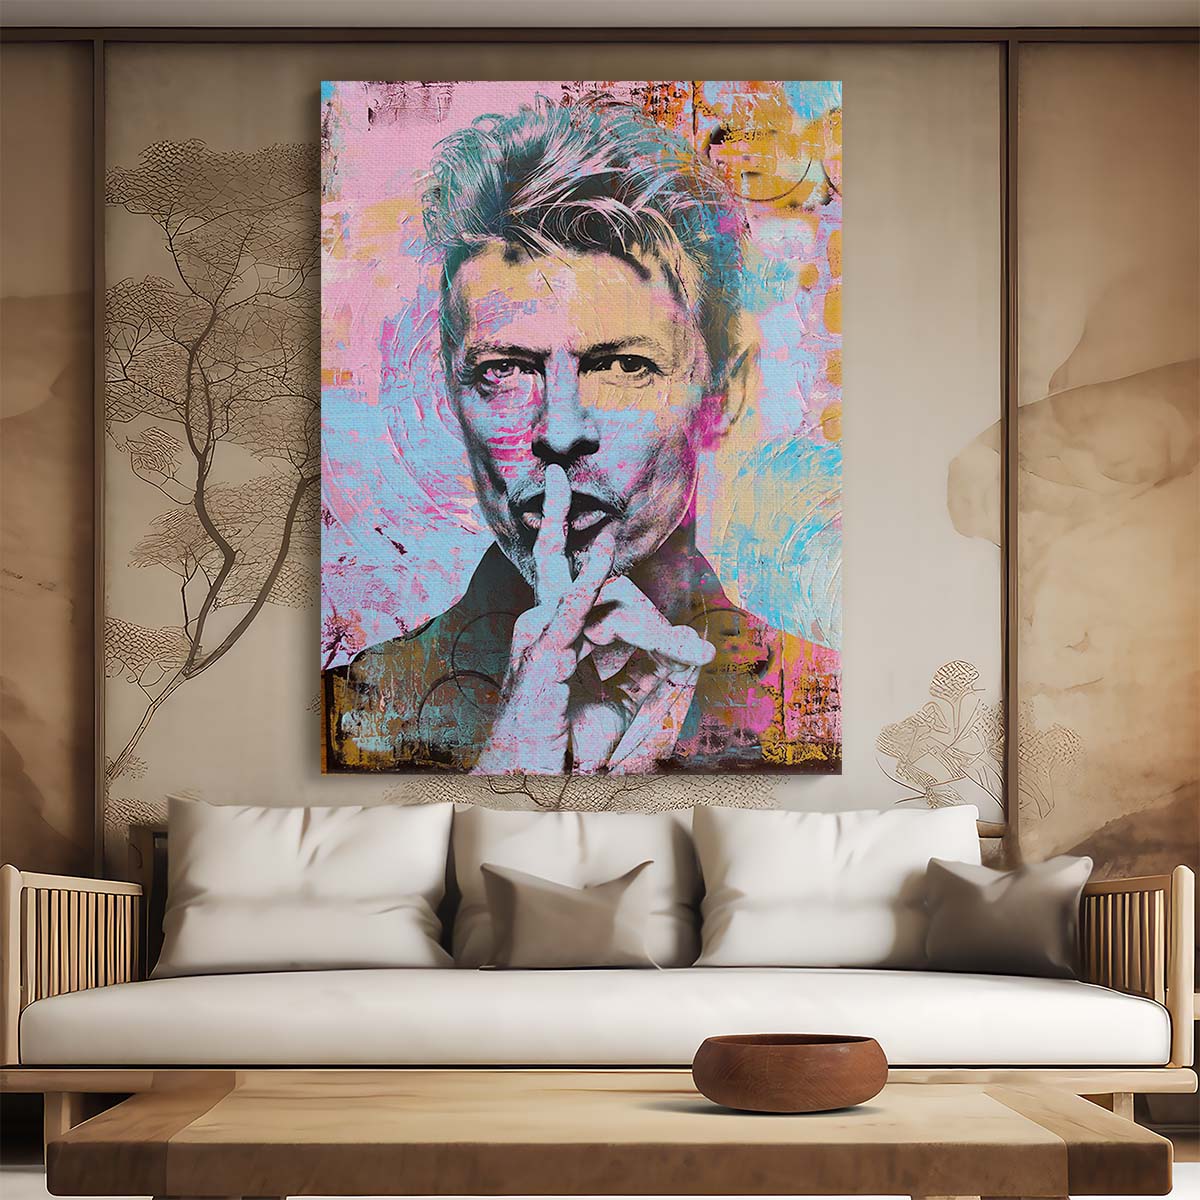 David Bowie Circles Graffiti Wall Art by Luxuriance Designs. Made in USA.